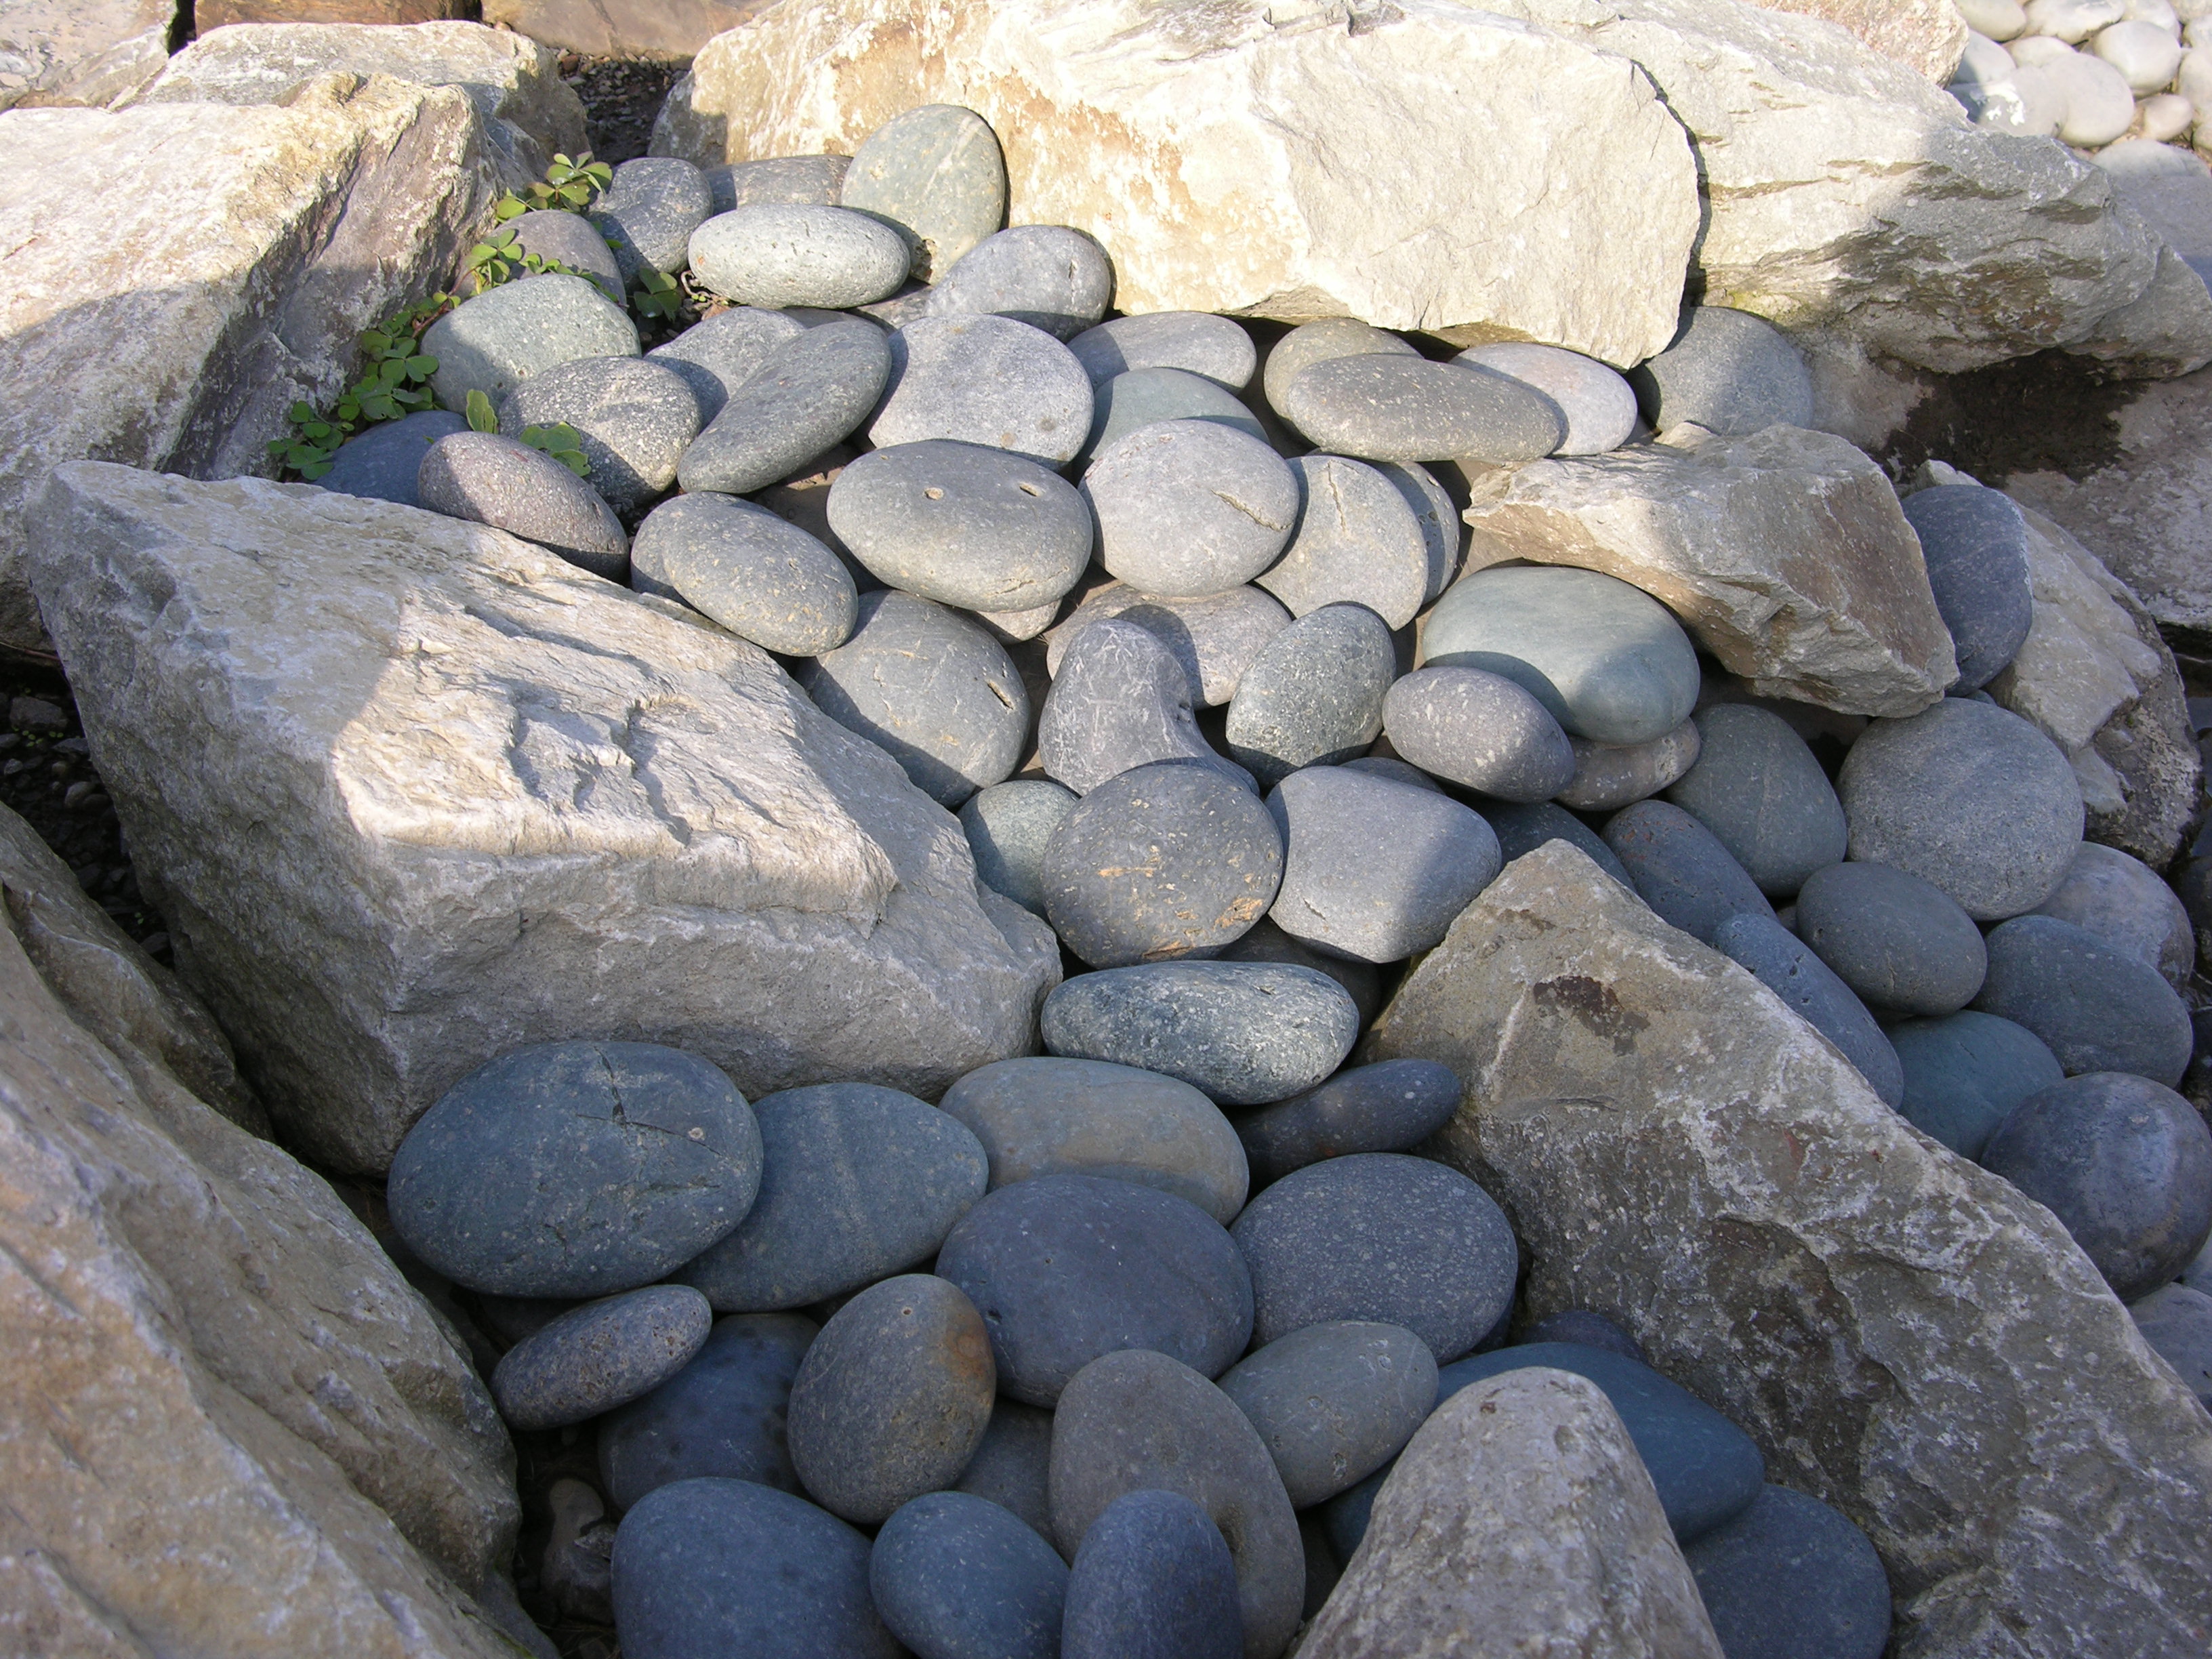 Winter Landscaping With Decorative Rock | Portland Rock and ...